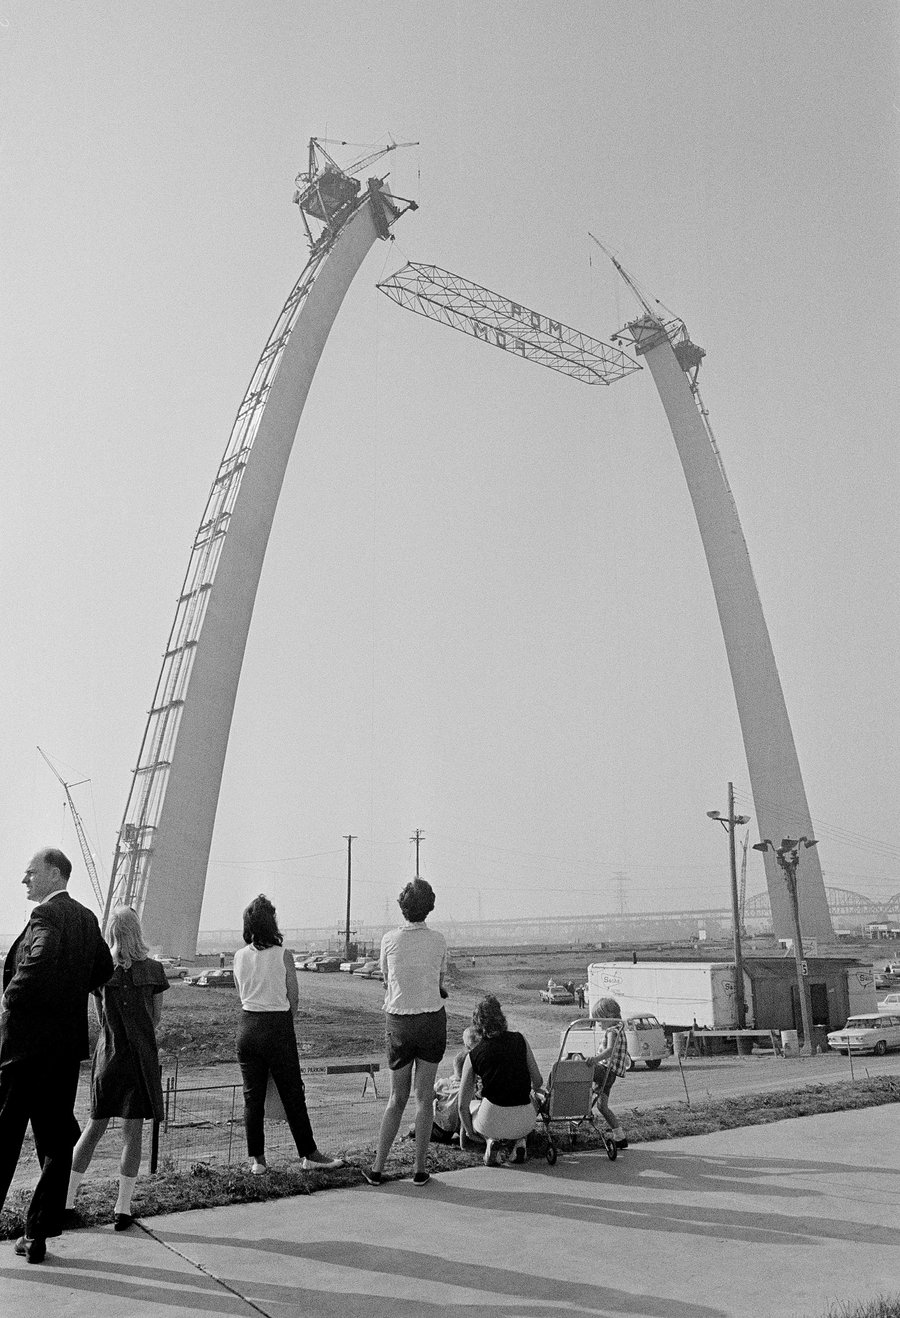 The iconic Gateway Arch, looming large over St. Louis in 1965.